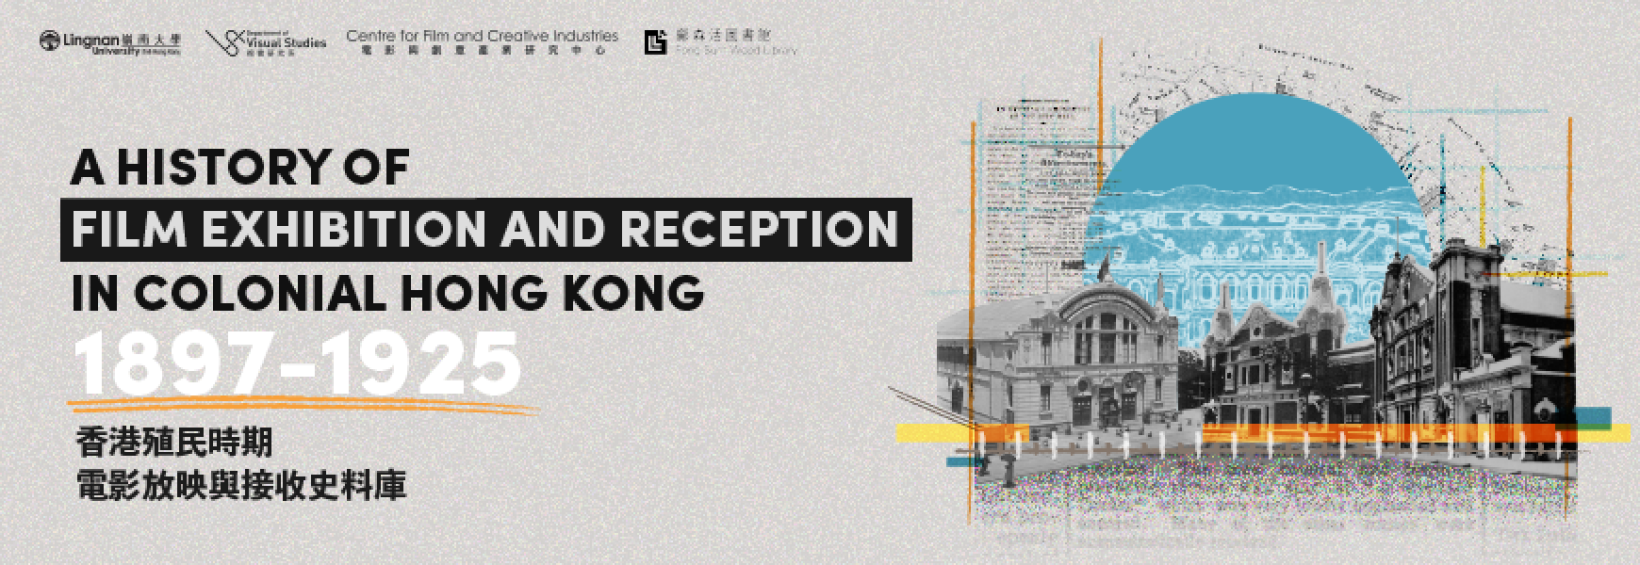 New open-access database launched to showcase history of film exhibition and reception in Colonial Hong Kong